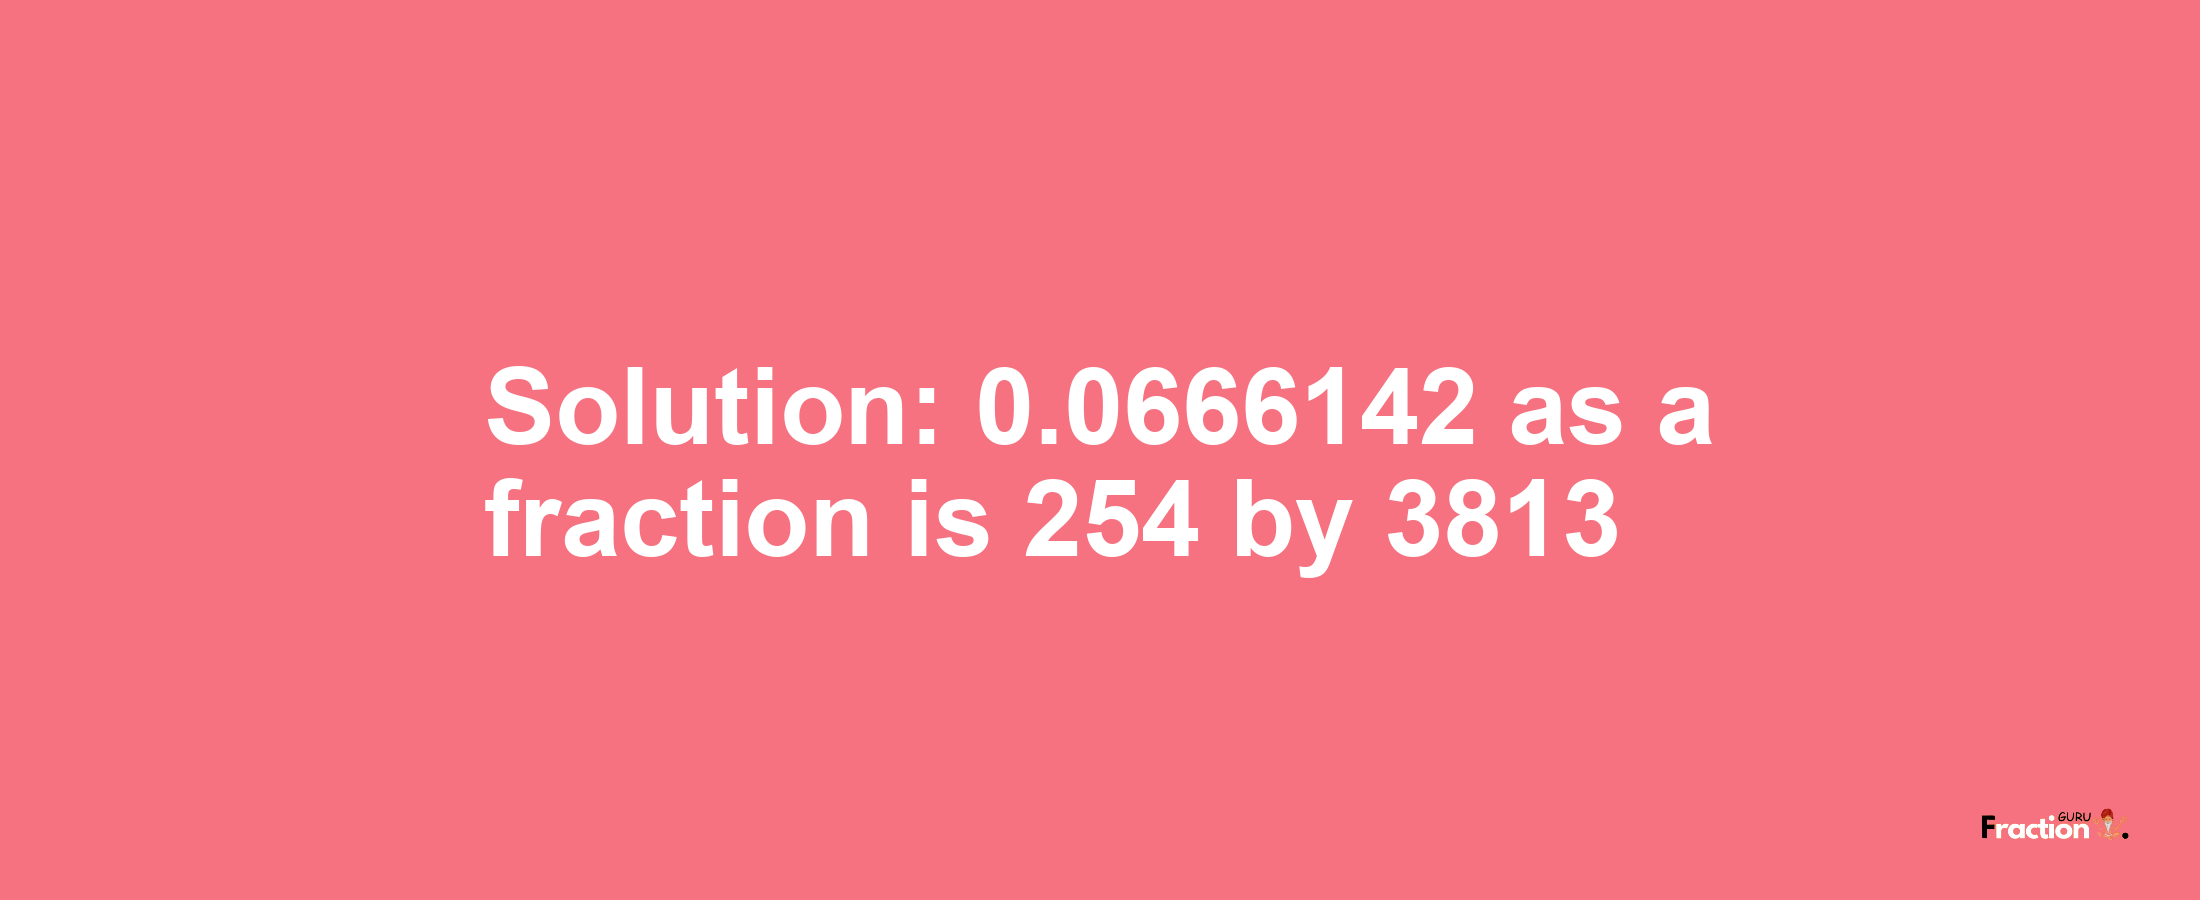 Solution:0.0666142 as a fraction is 254/3813